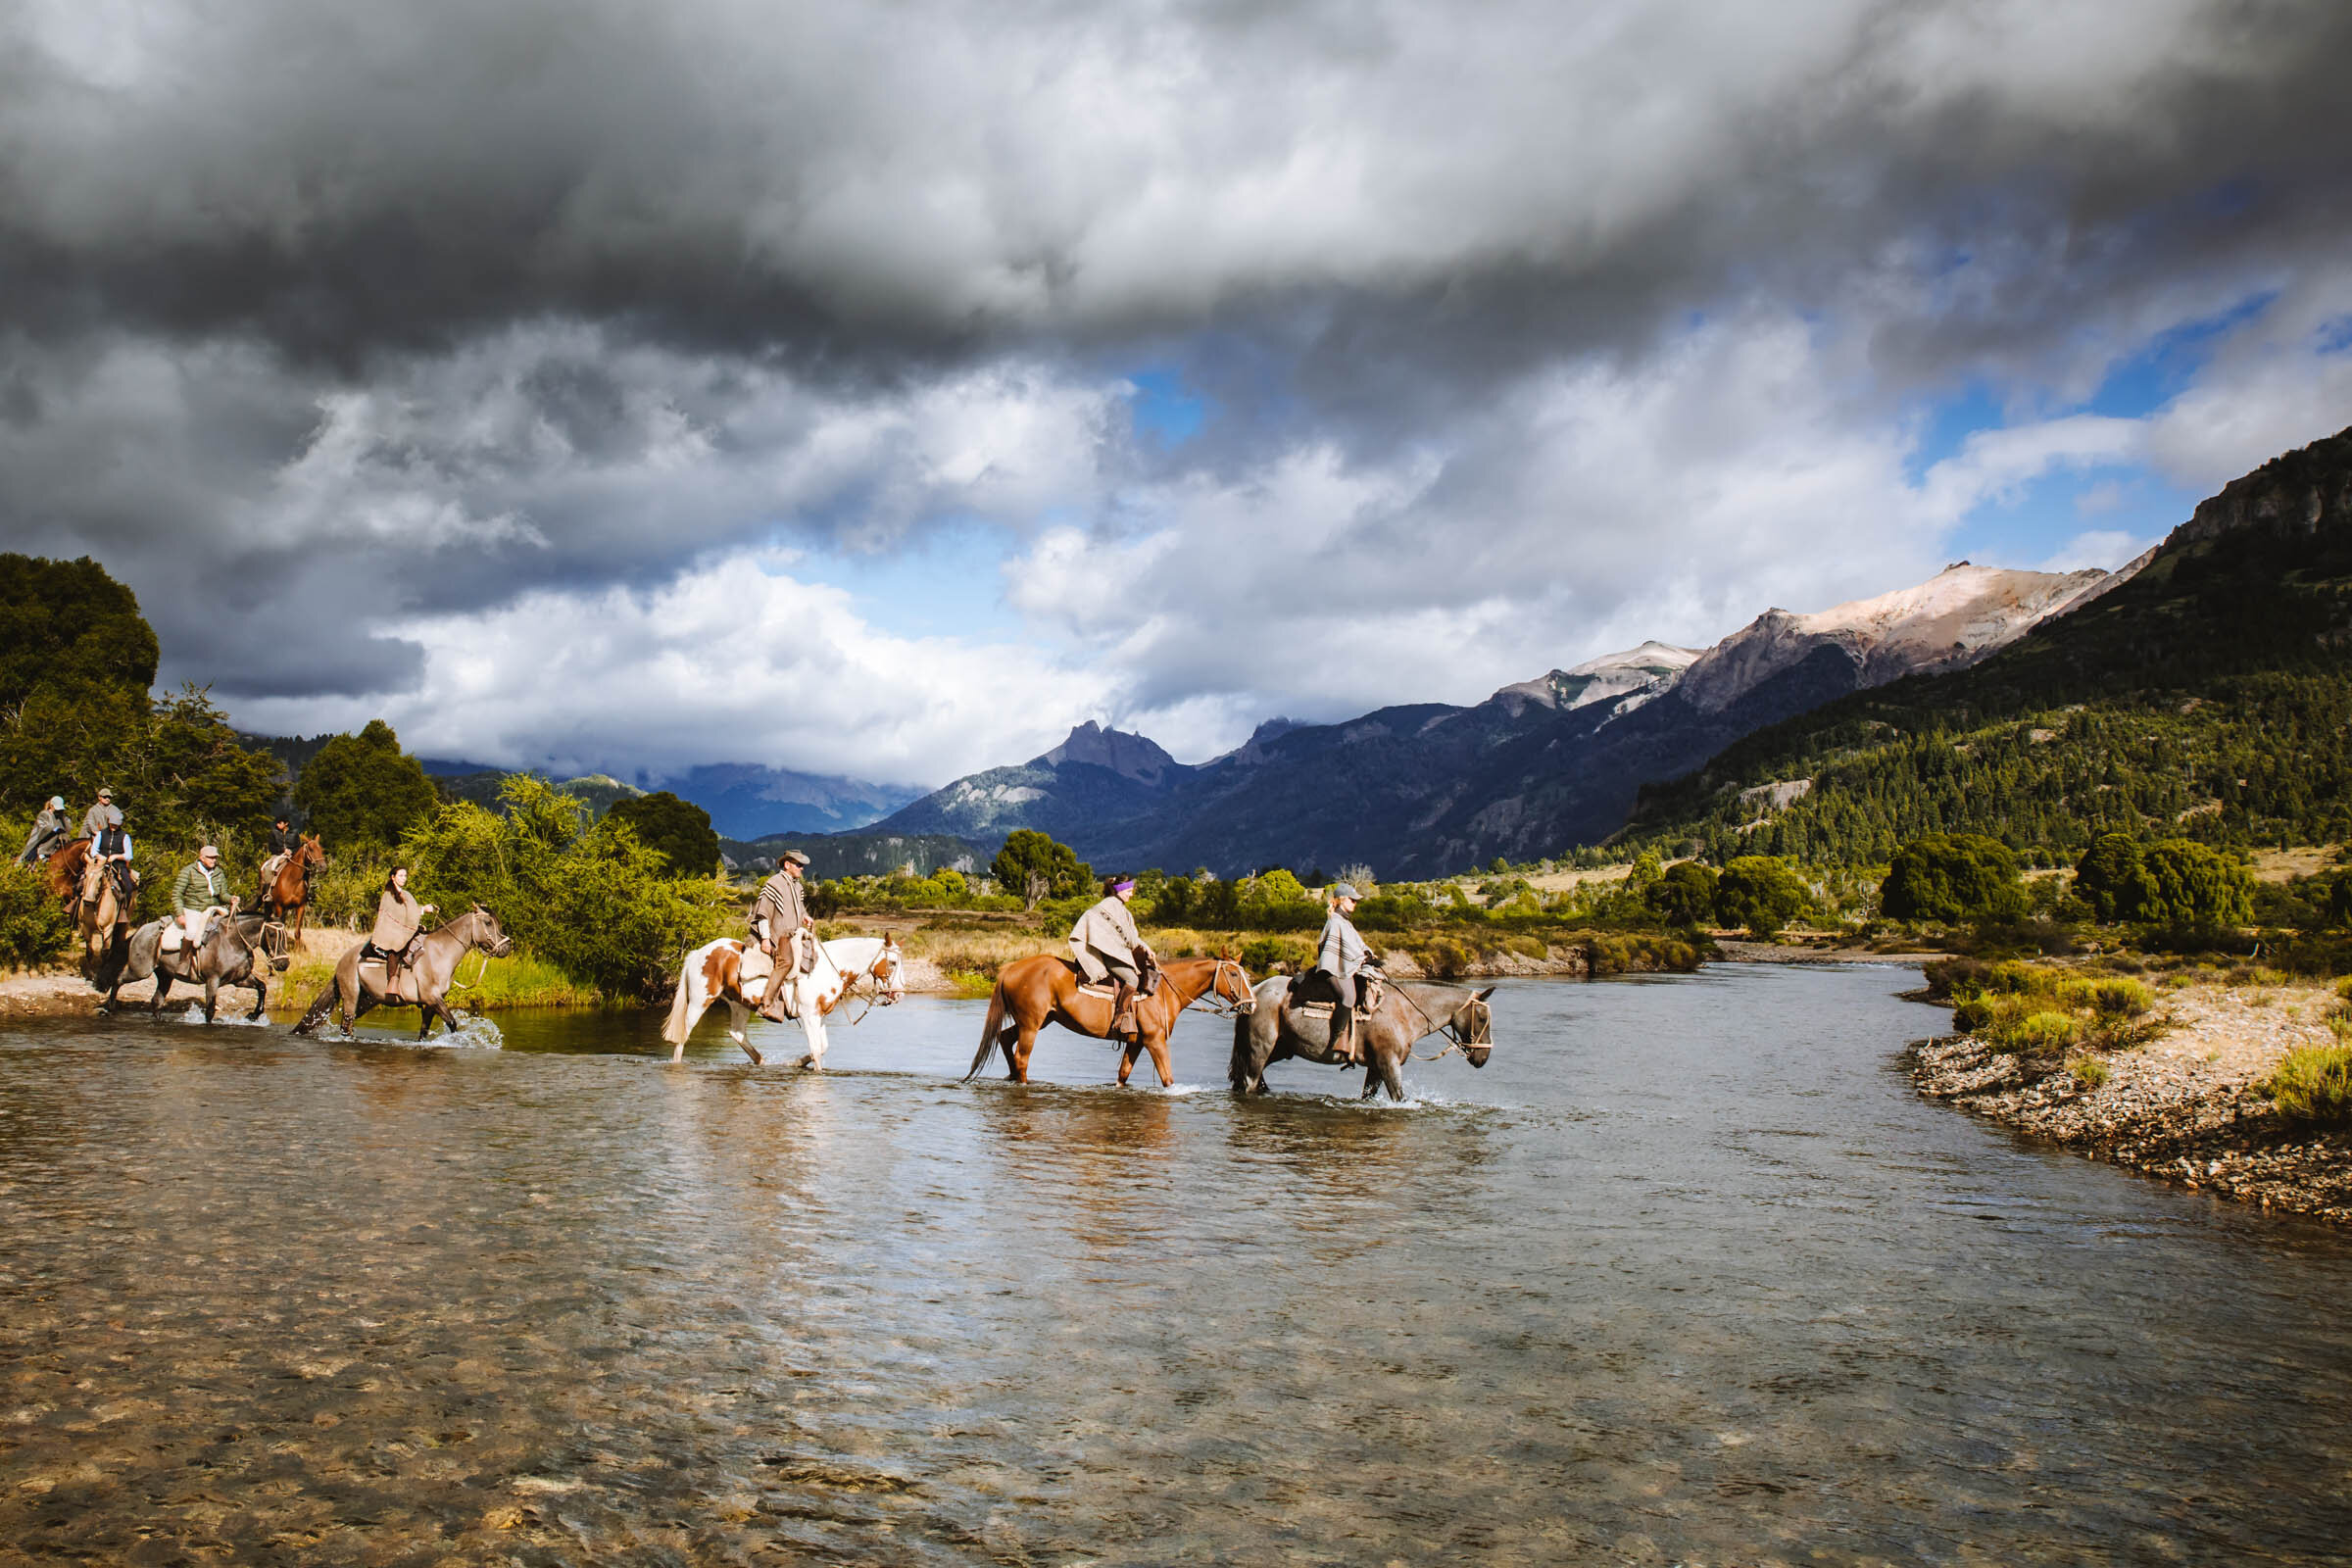  This safari is spread over seven days in a remote area of Western Argentina. The daily rides are generally unhurried and can be accomplished with basic skill levels, as the terrain precludes most sorts of equestrian acrobatics. Out here the horse is